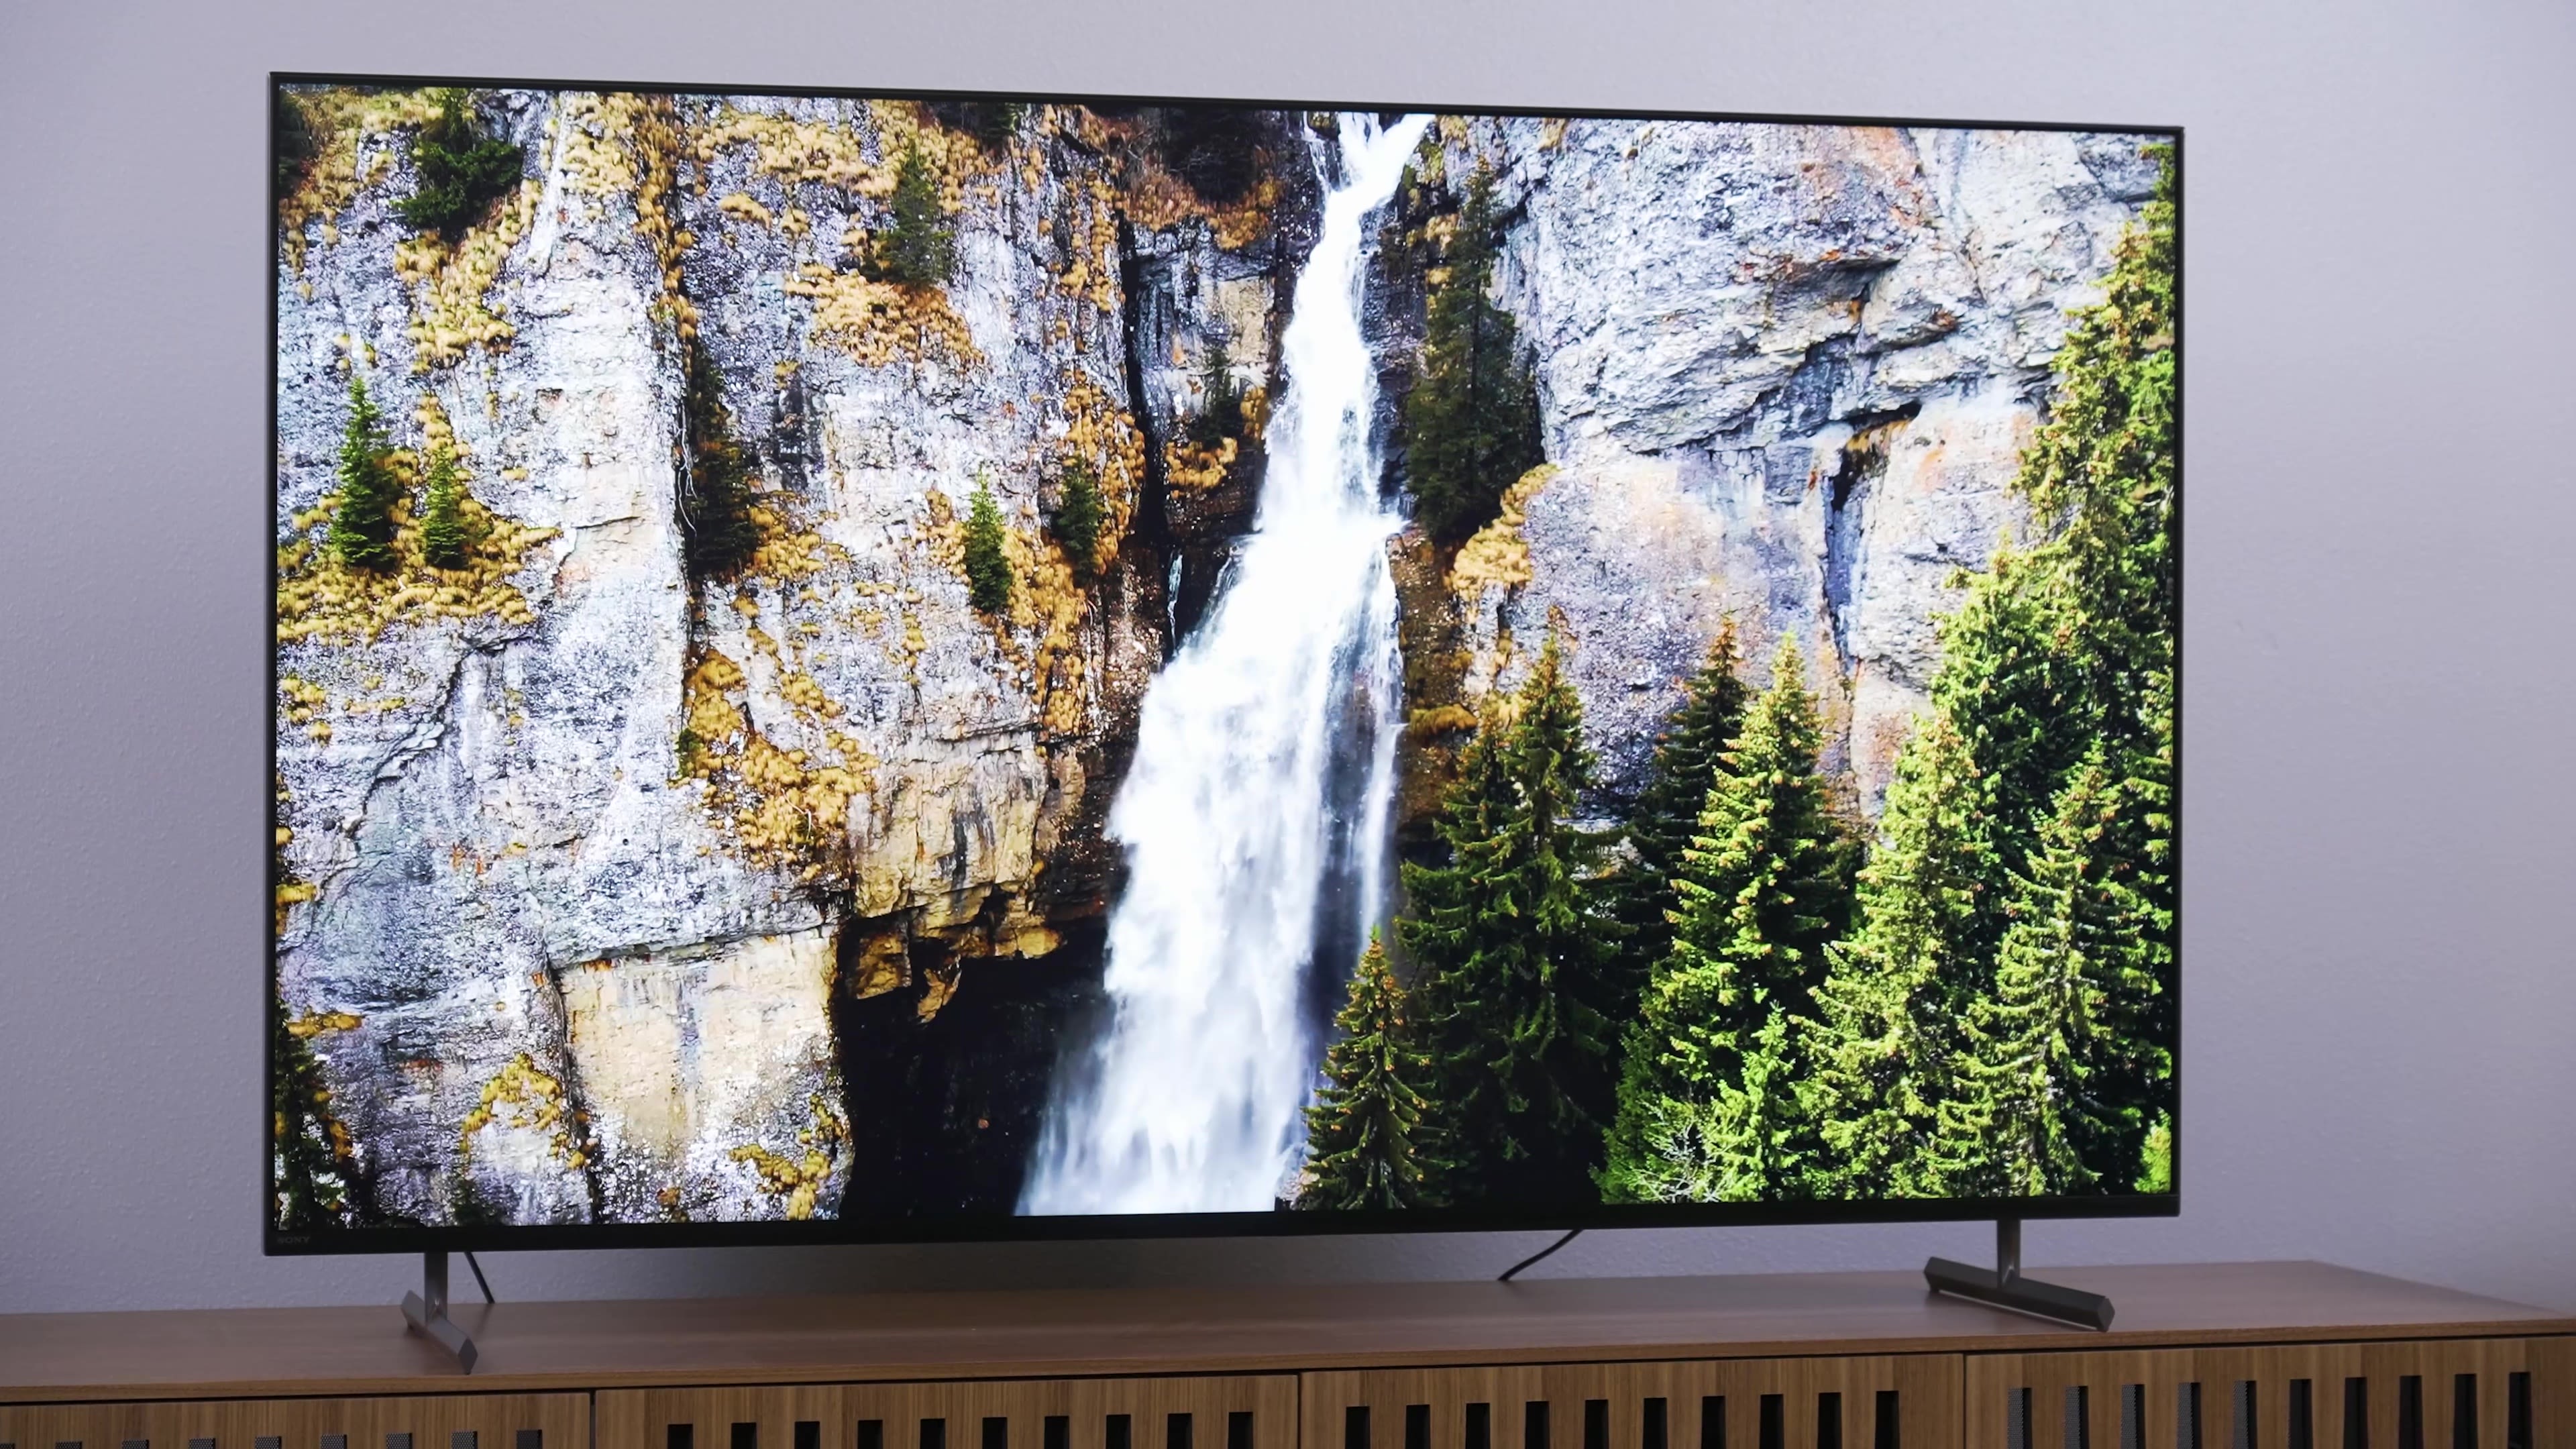 Sony’s gorgeous 65-inch Bravia XR TV has a $200 discount today